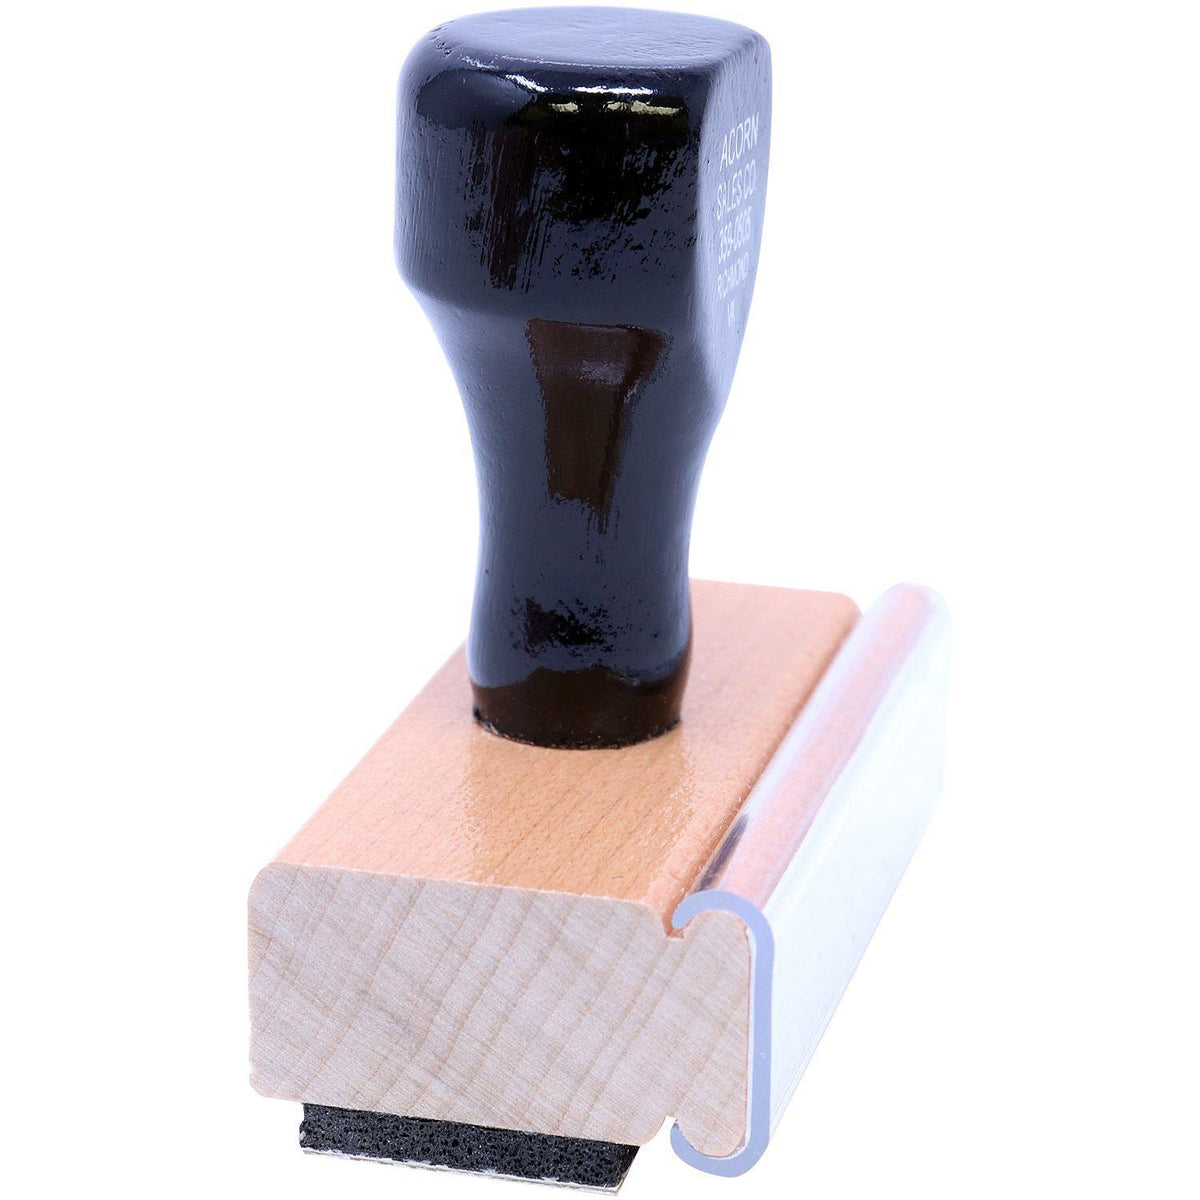 Side View of Expres Entrega Inmedia Rubber Stamp at an Angle